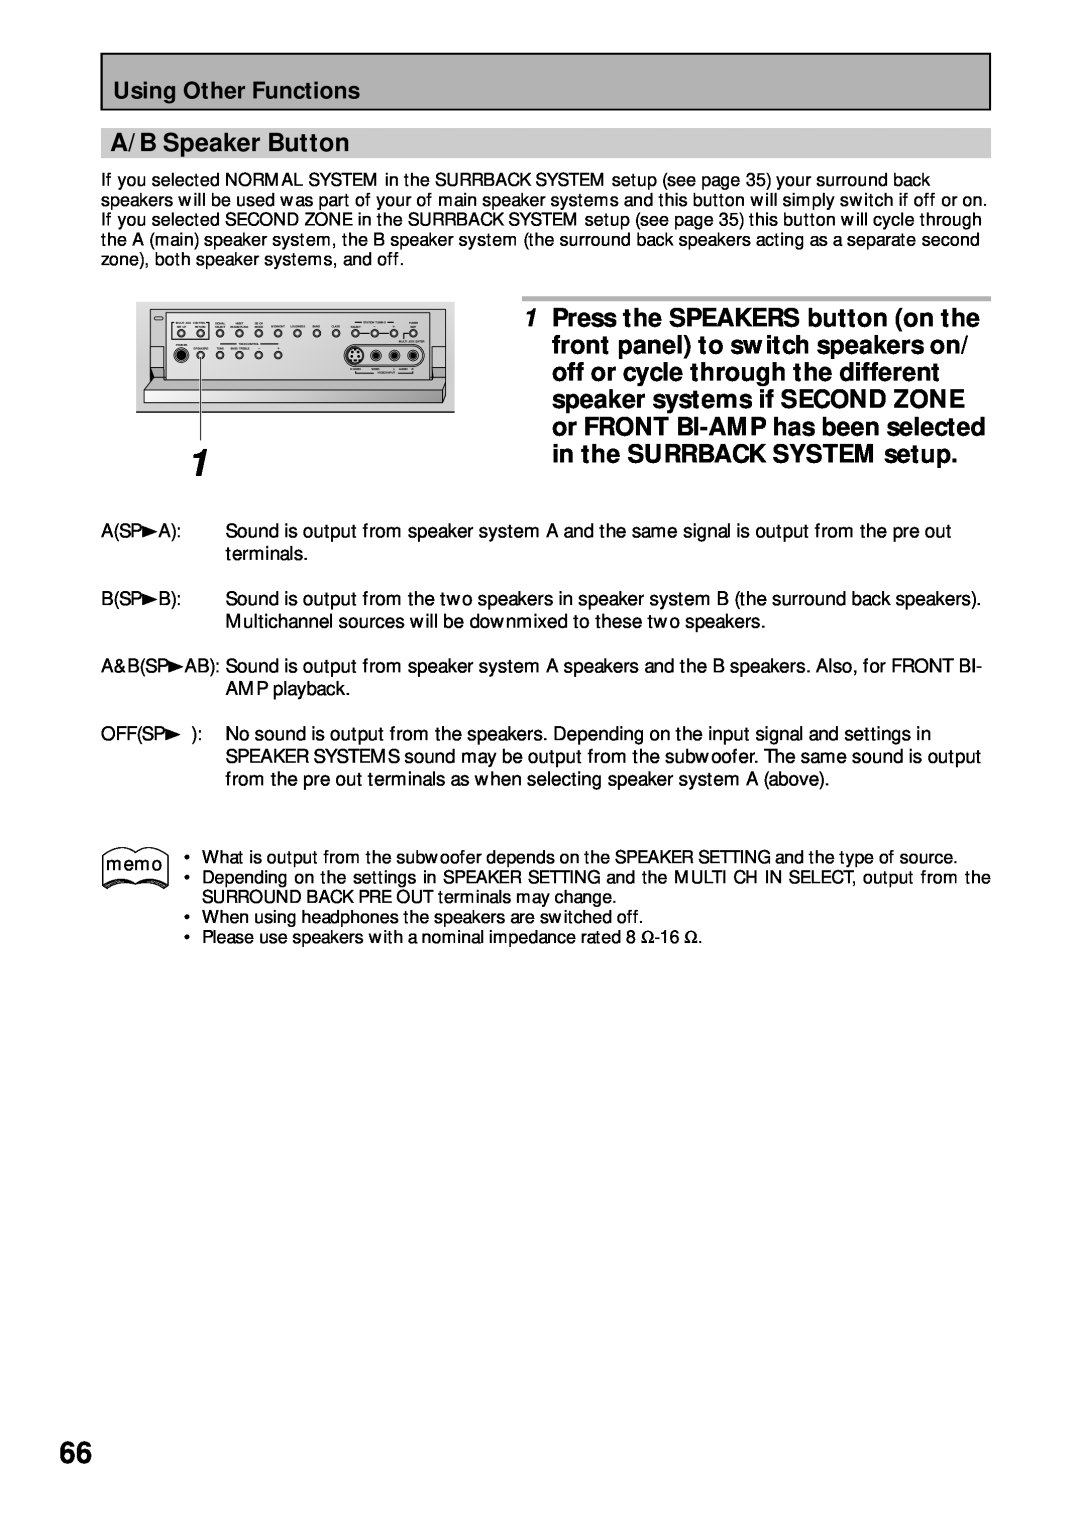 Pioneer VSX-43TX operating instructions A/B Speaker Button, Using Other Functions 